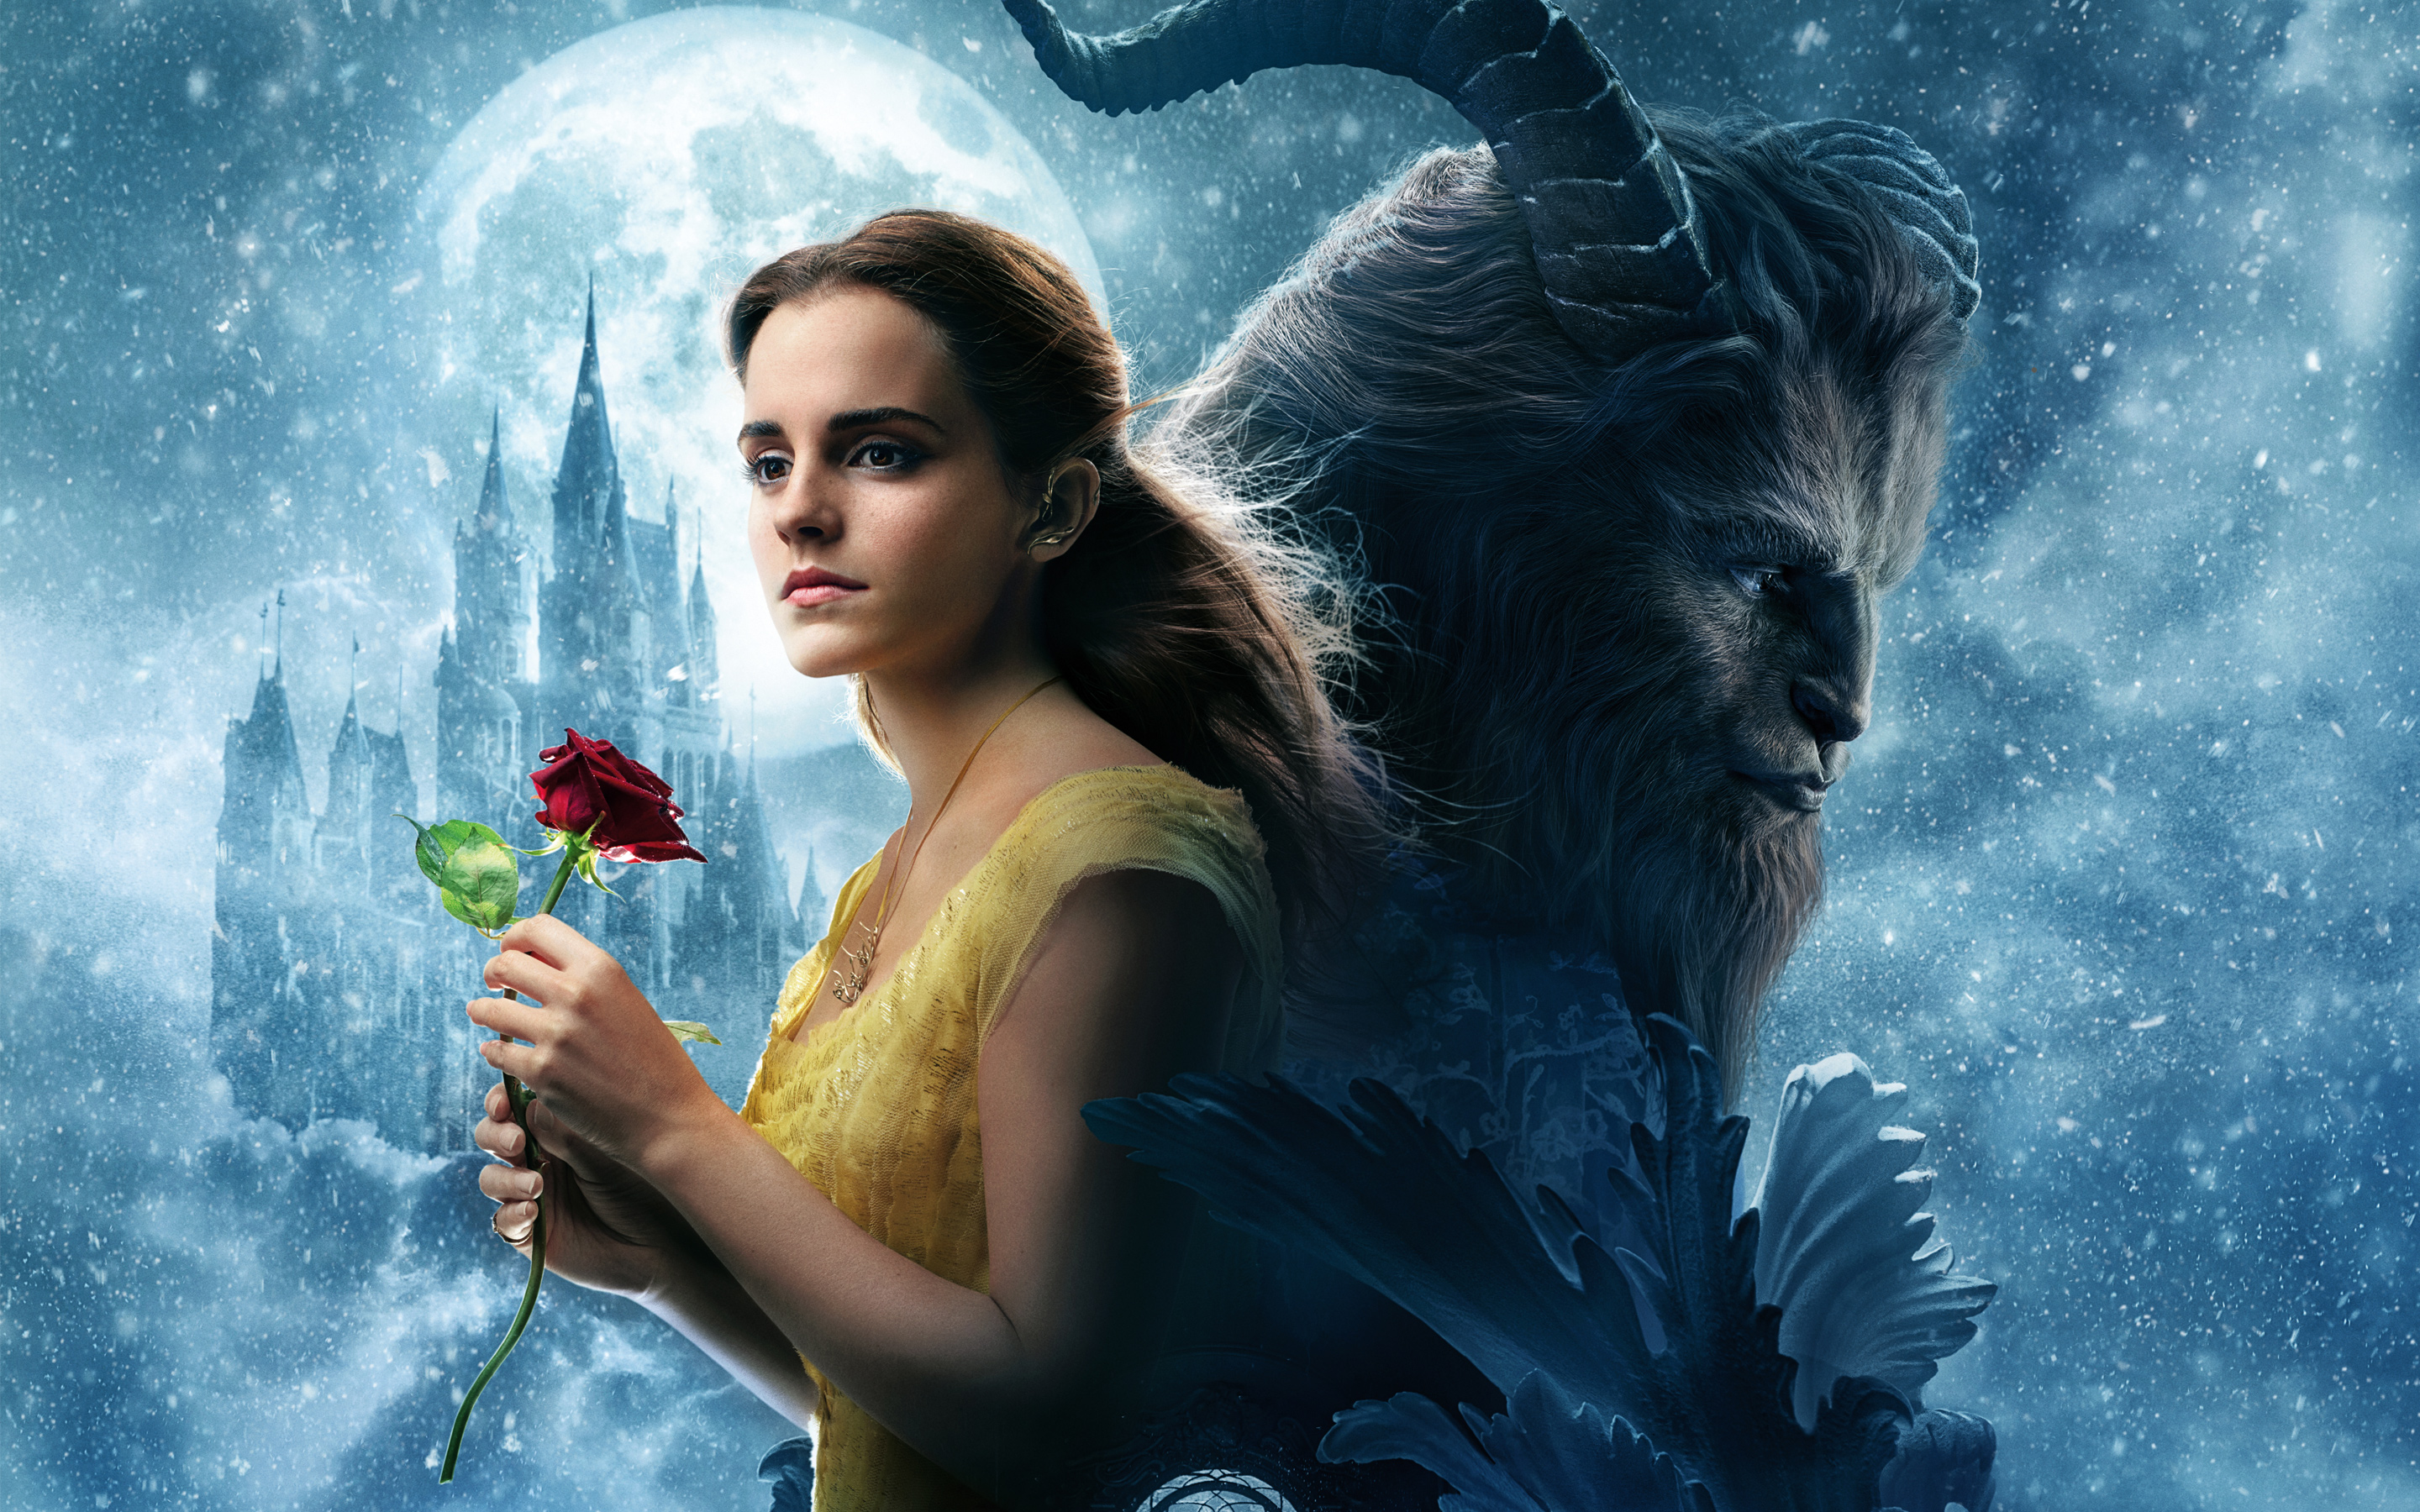 beauty-and-the-beast-movie-hd-movies-4k-wallpapers-images-backgrounds-photos-and-pictures